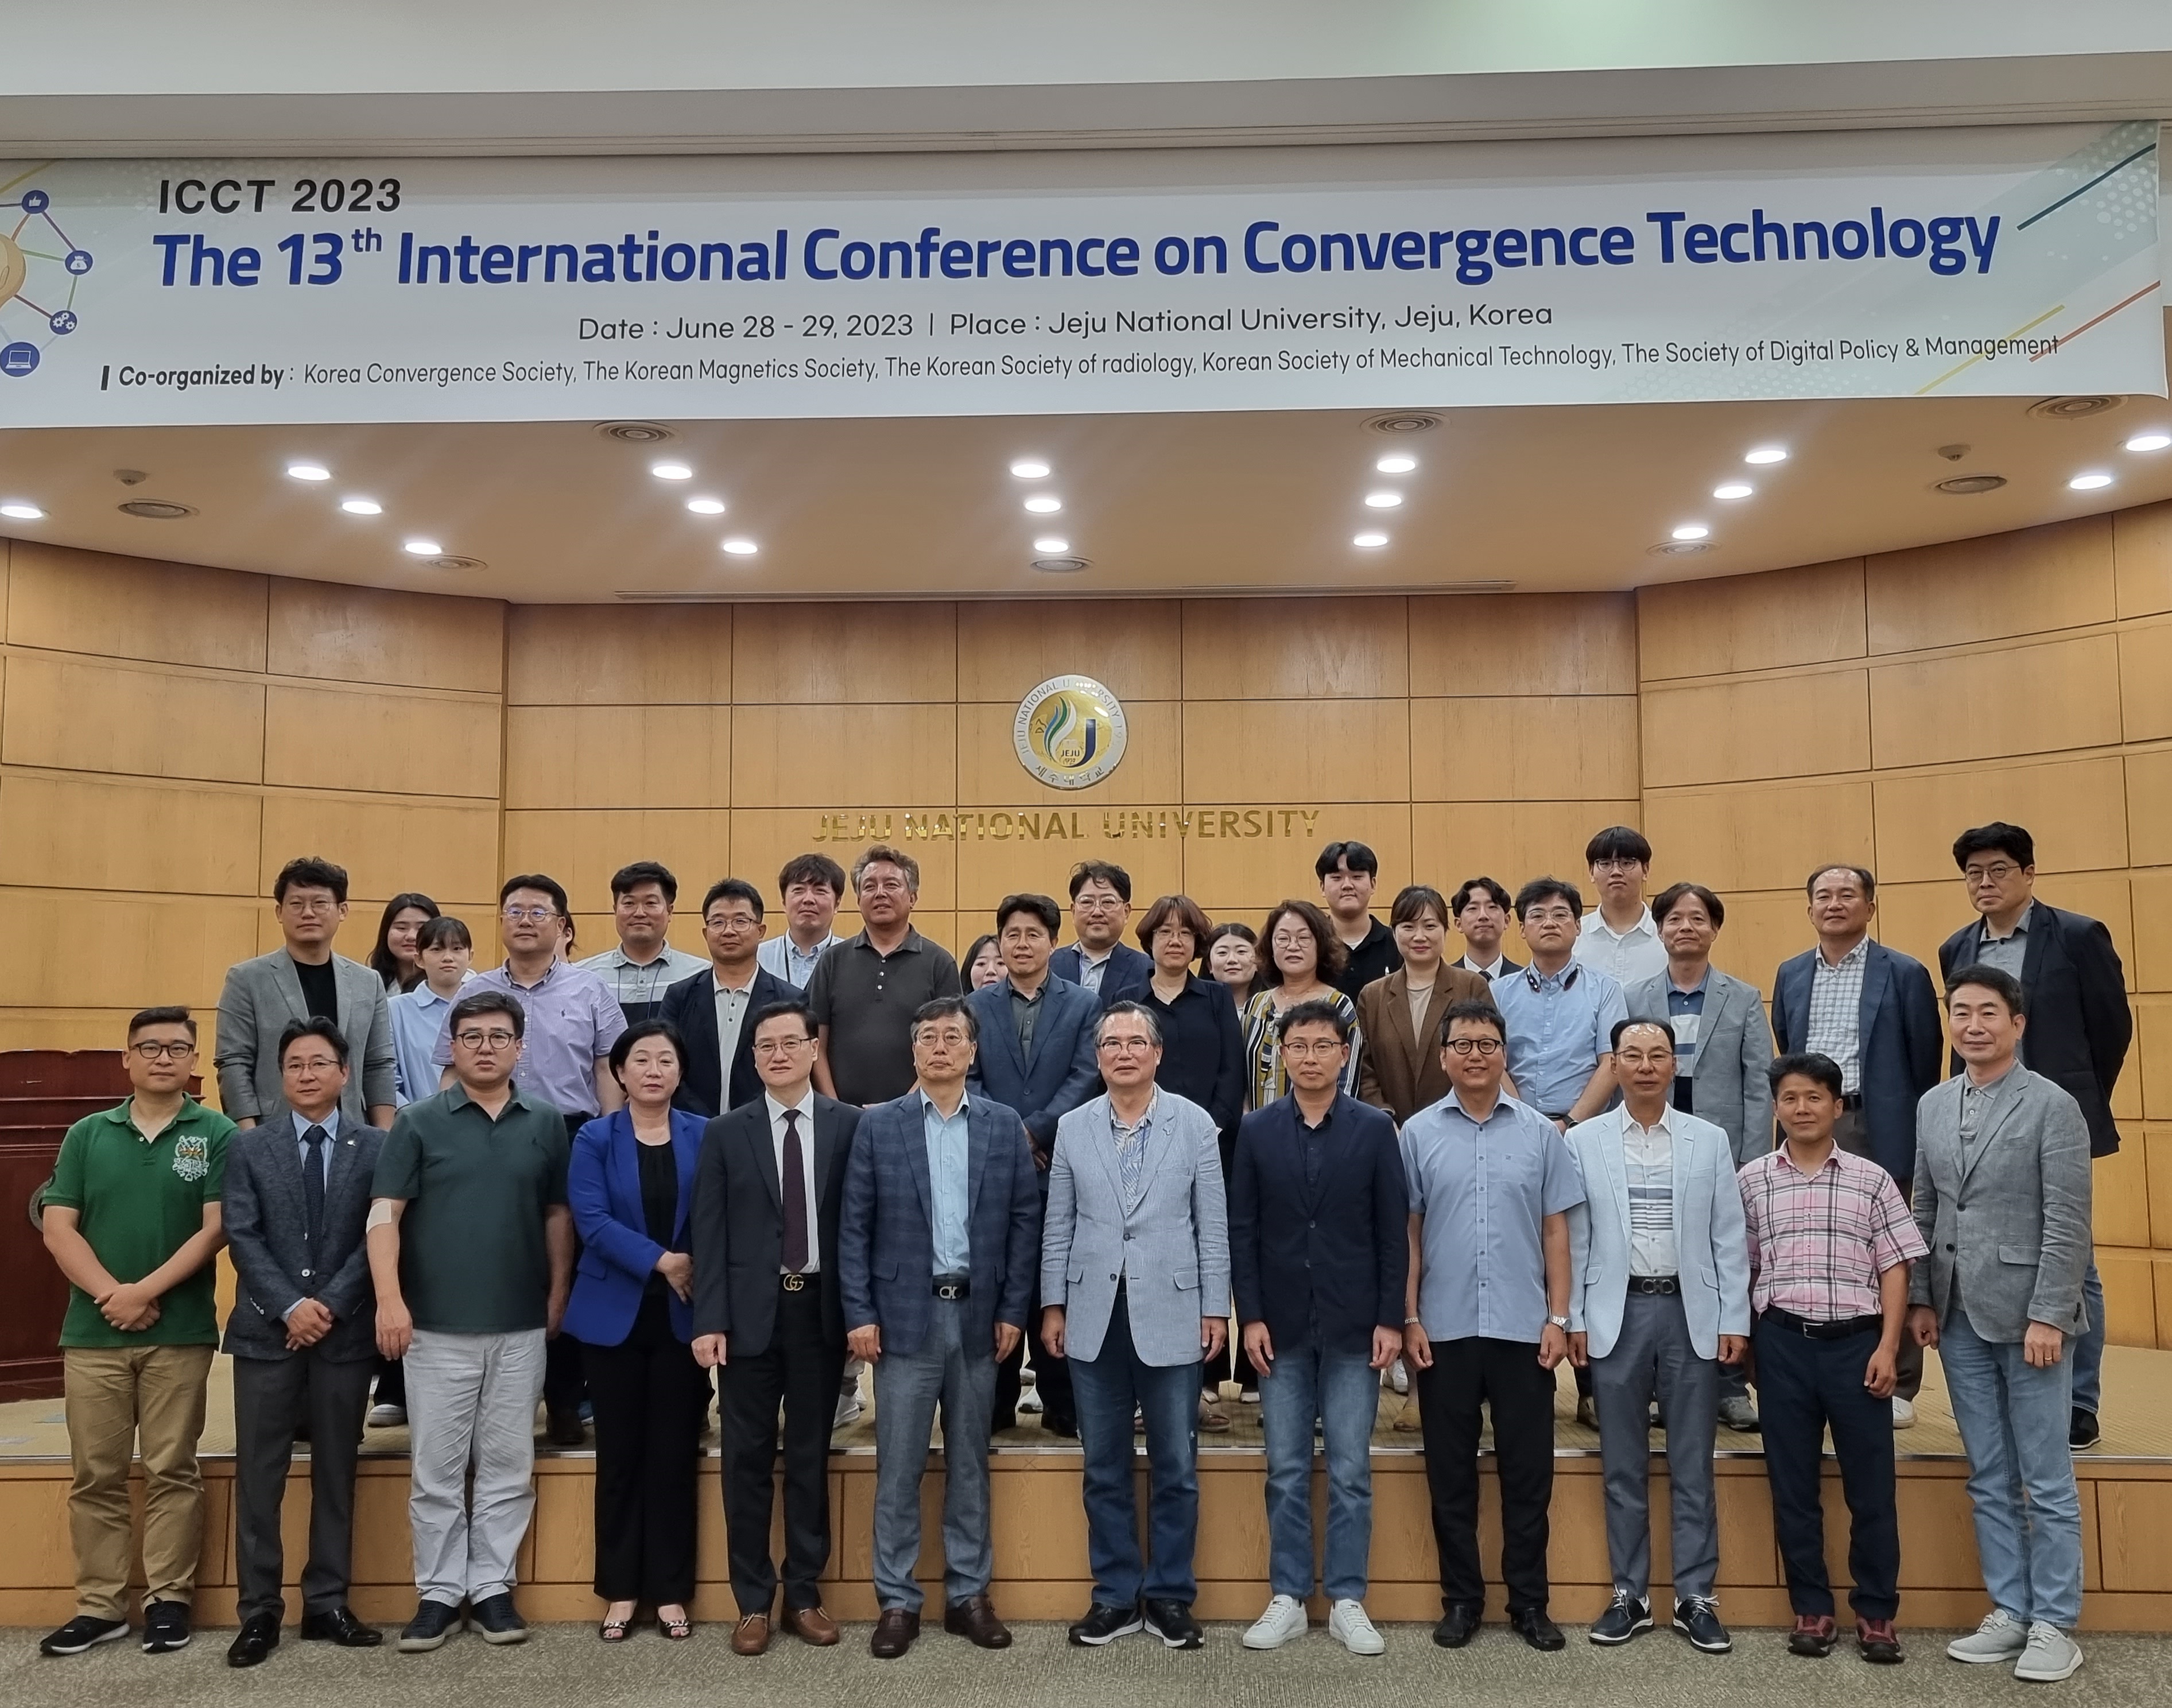 The 13th International Conference on Convergence Technology in 2023